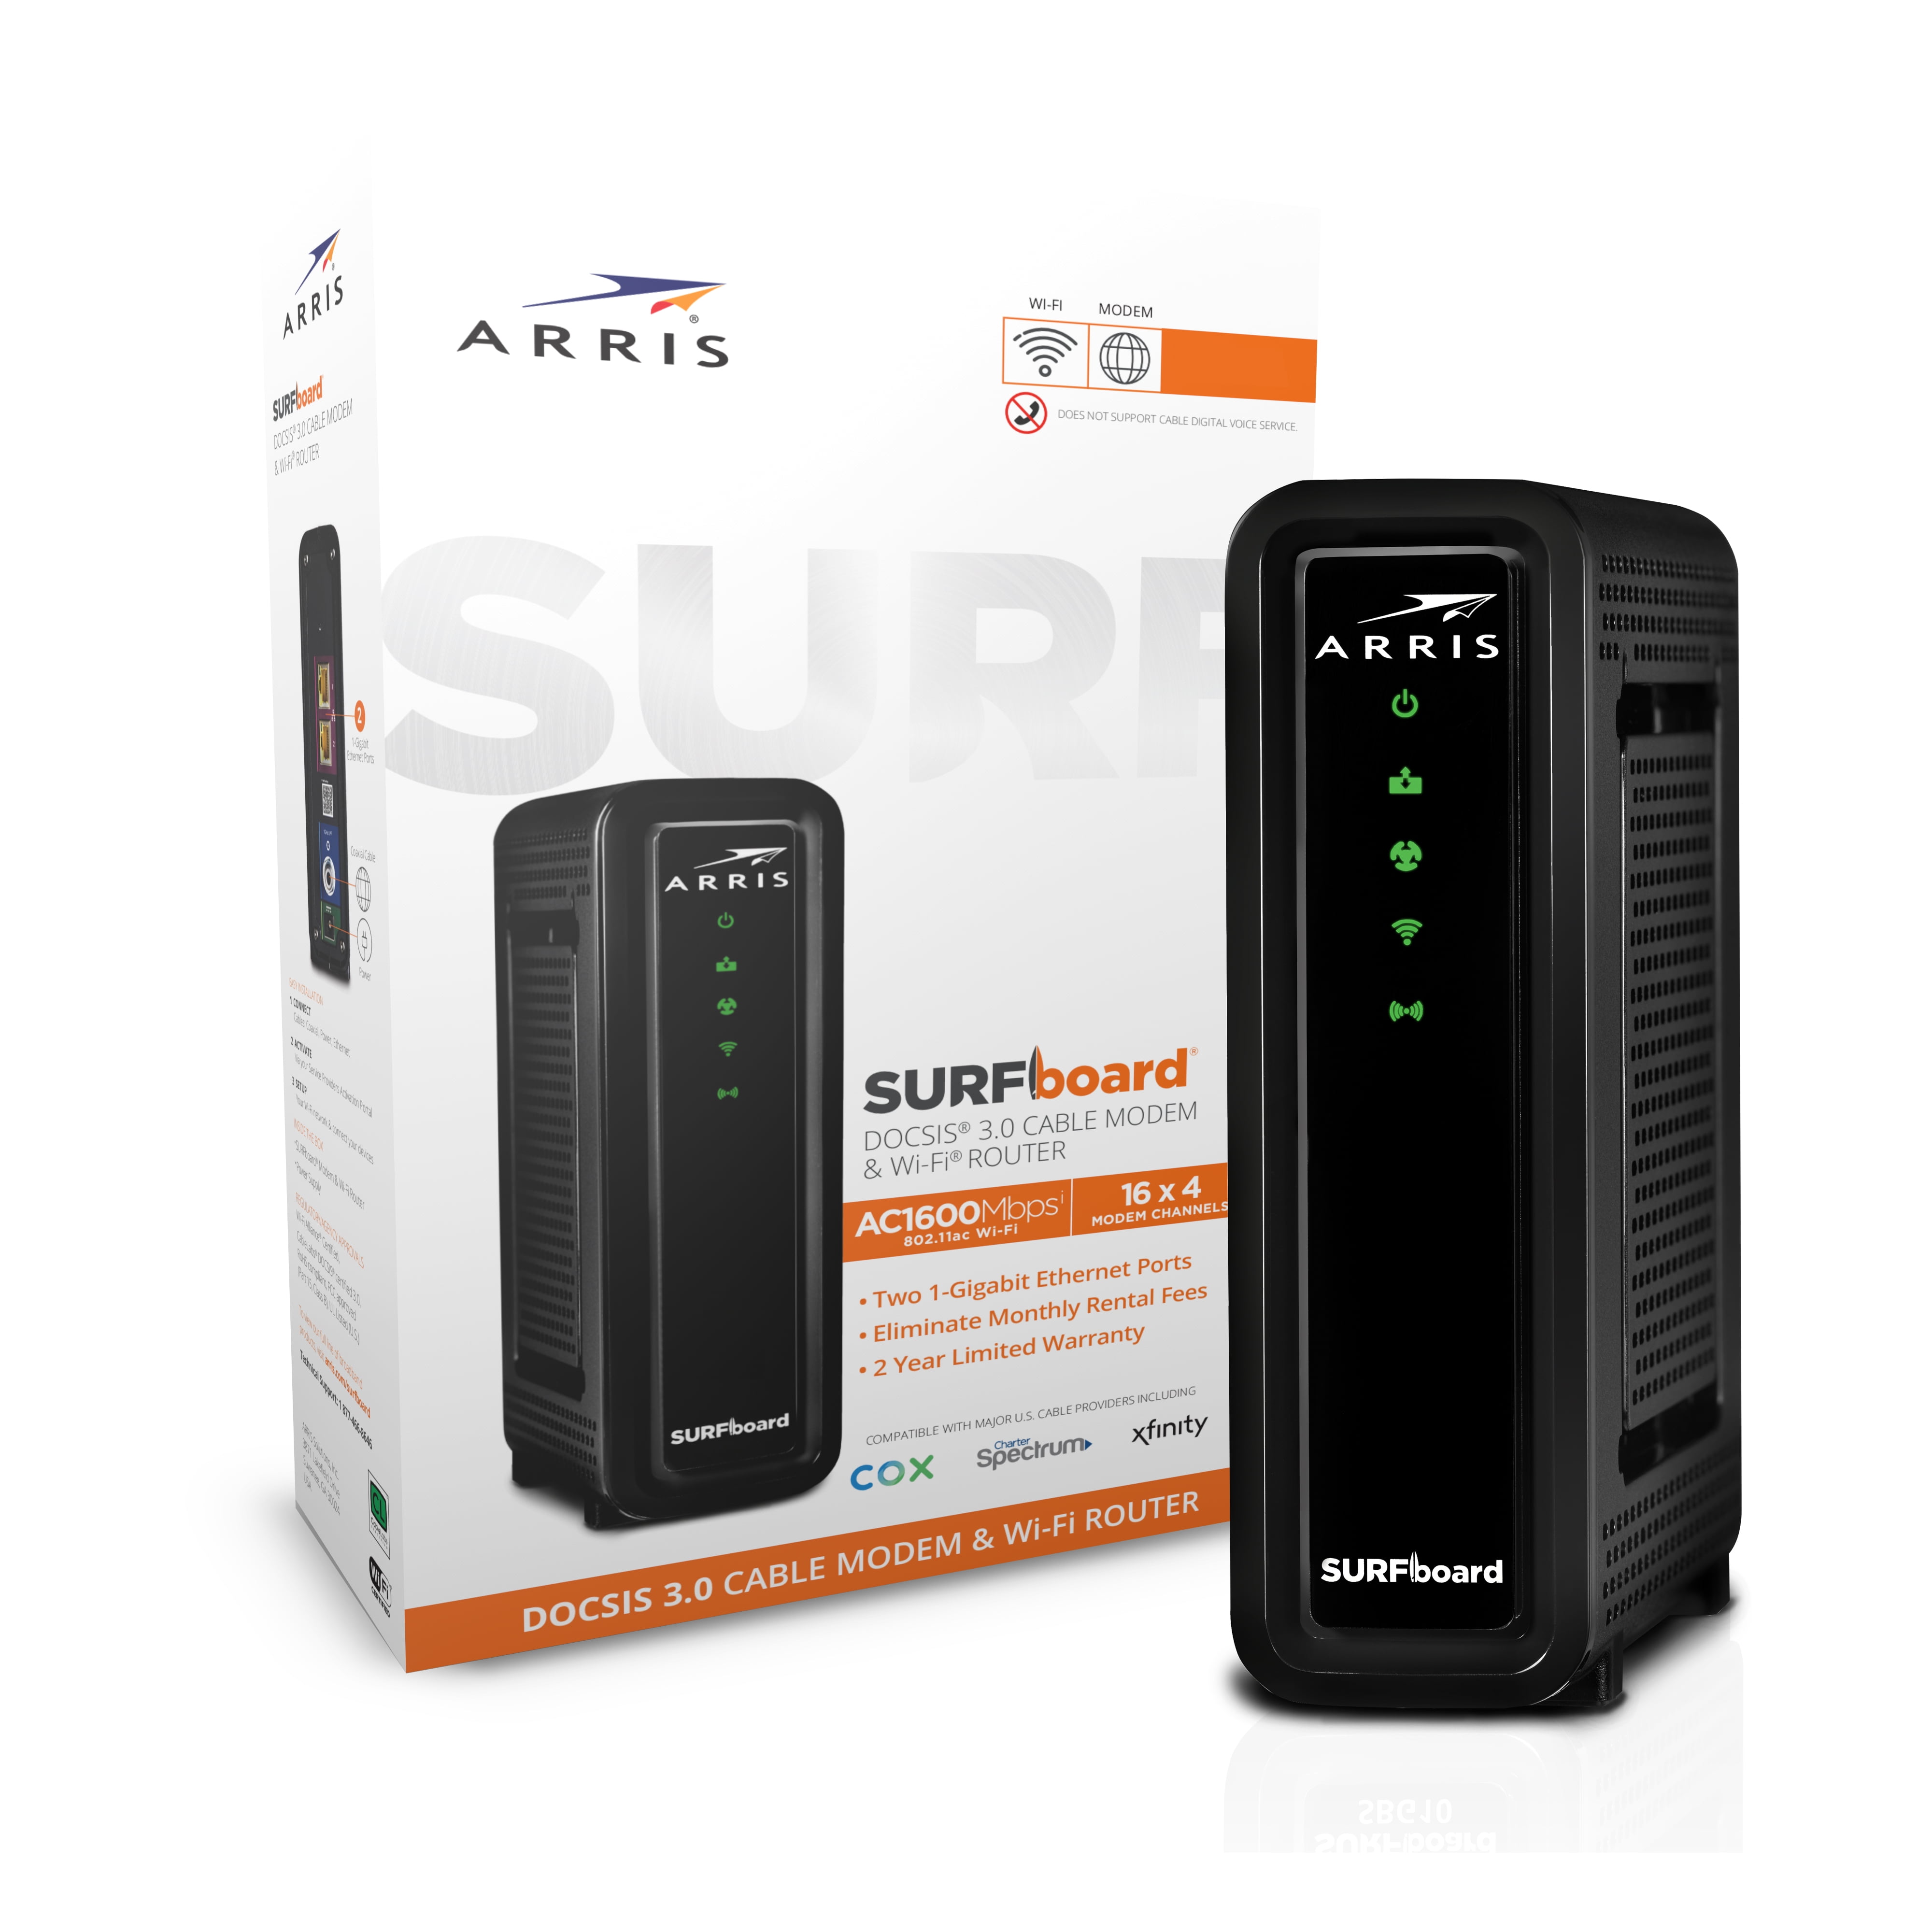 doolhof morfine Reusachtig ARRIS SURFboard 16x4 Cable Modem / AC1600 Dual-Band WiFi Router. Approved  for XFINITY Comcast, Cox, Charter and most other Cable Internet providers  for plans up to 300 Mbps. - Walmart.com